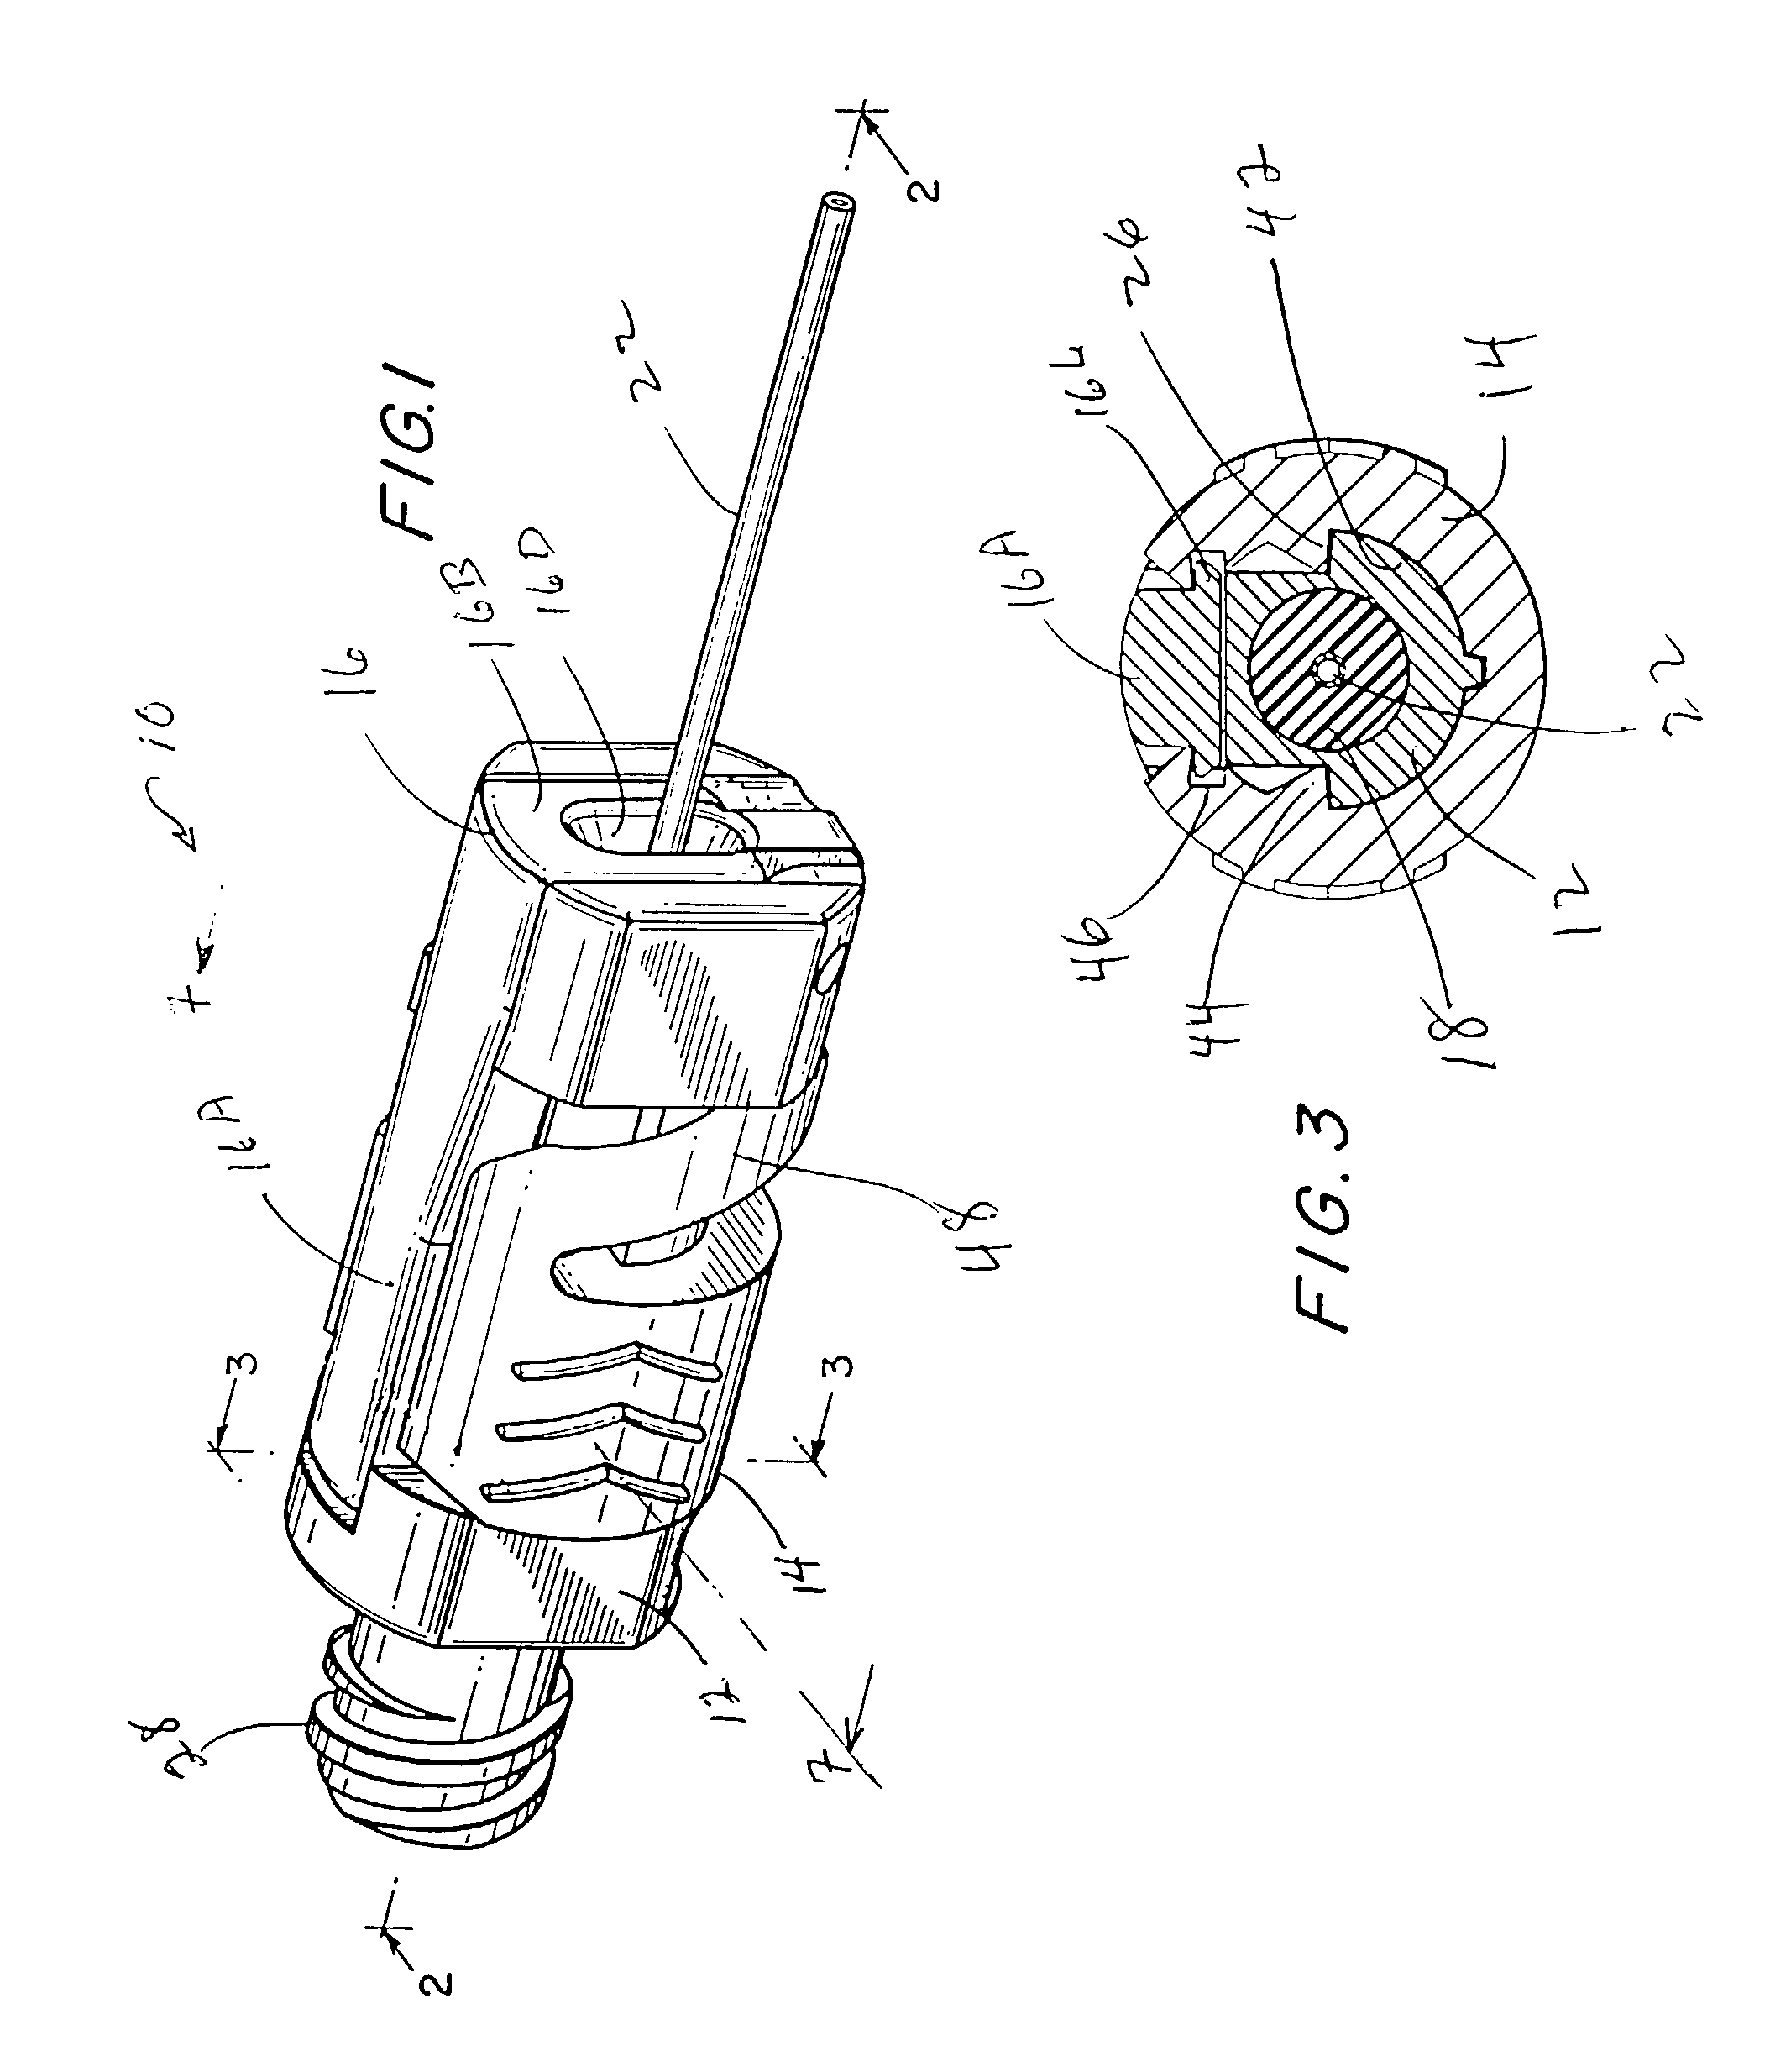 Catheter connector with pivot lever spring latch